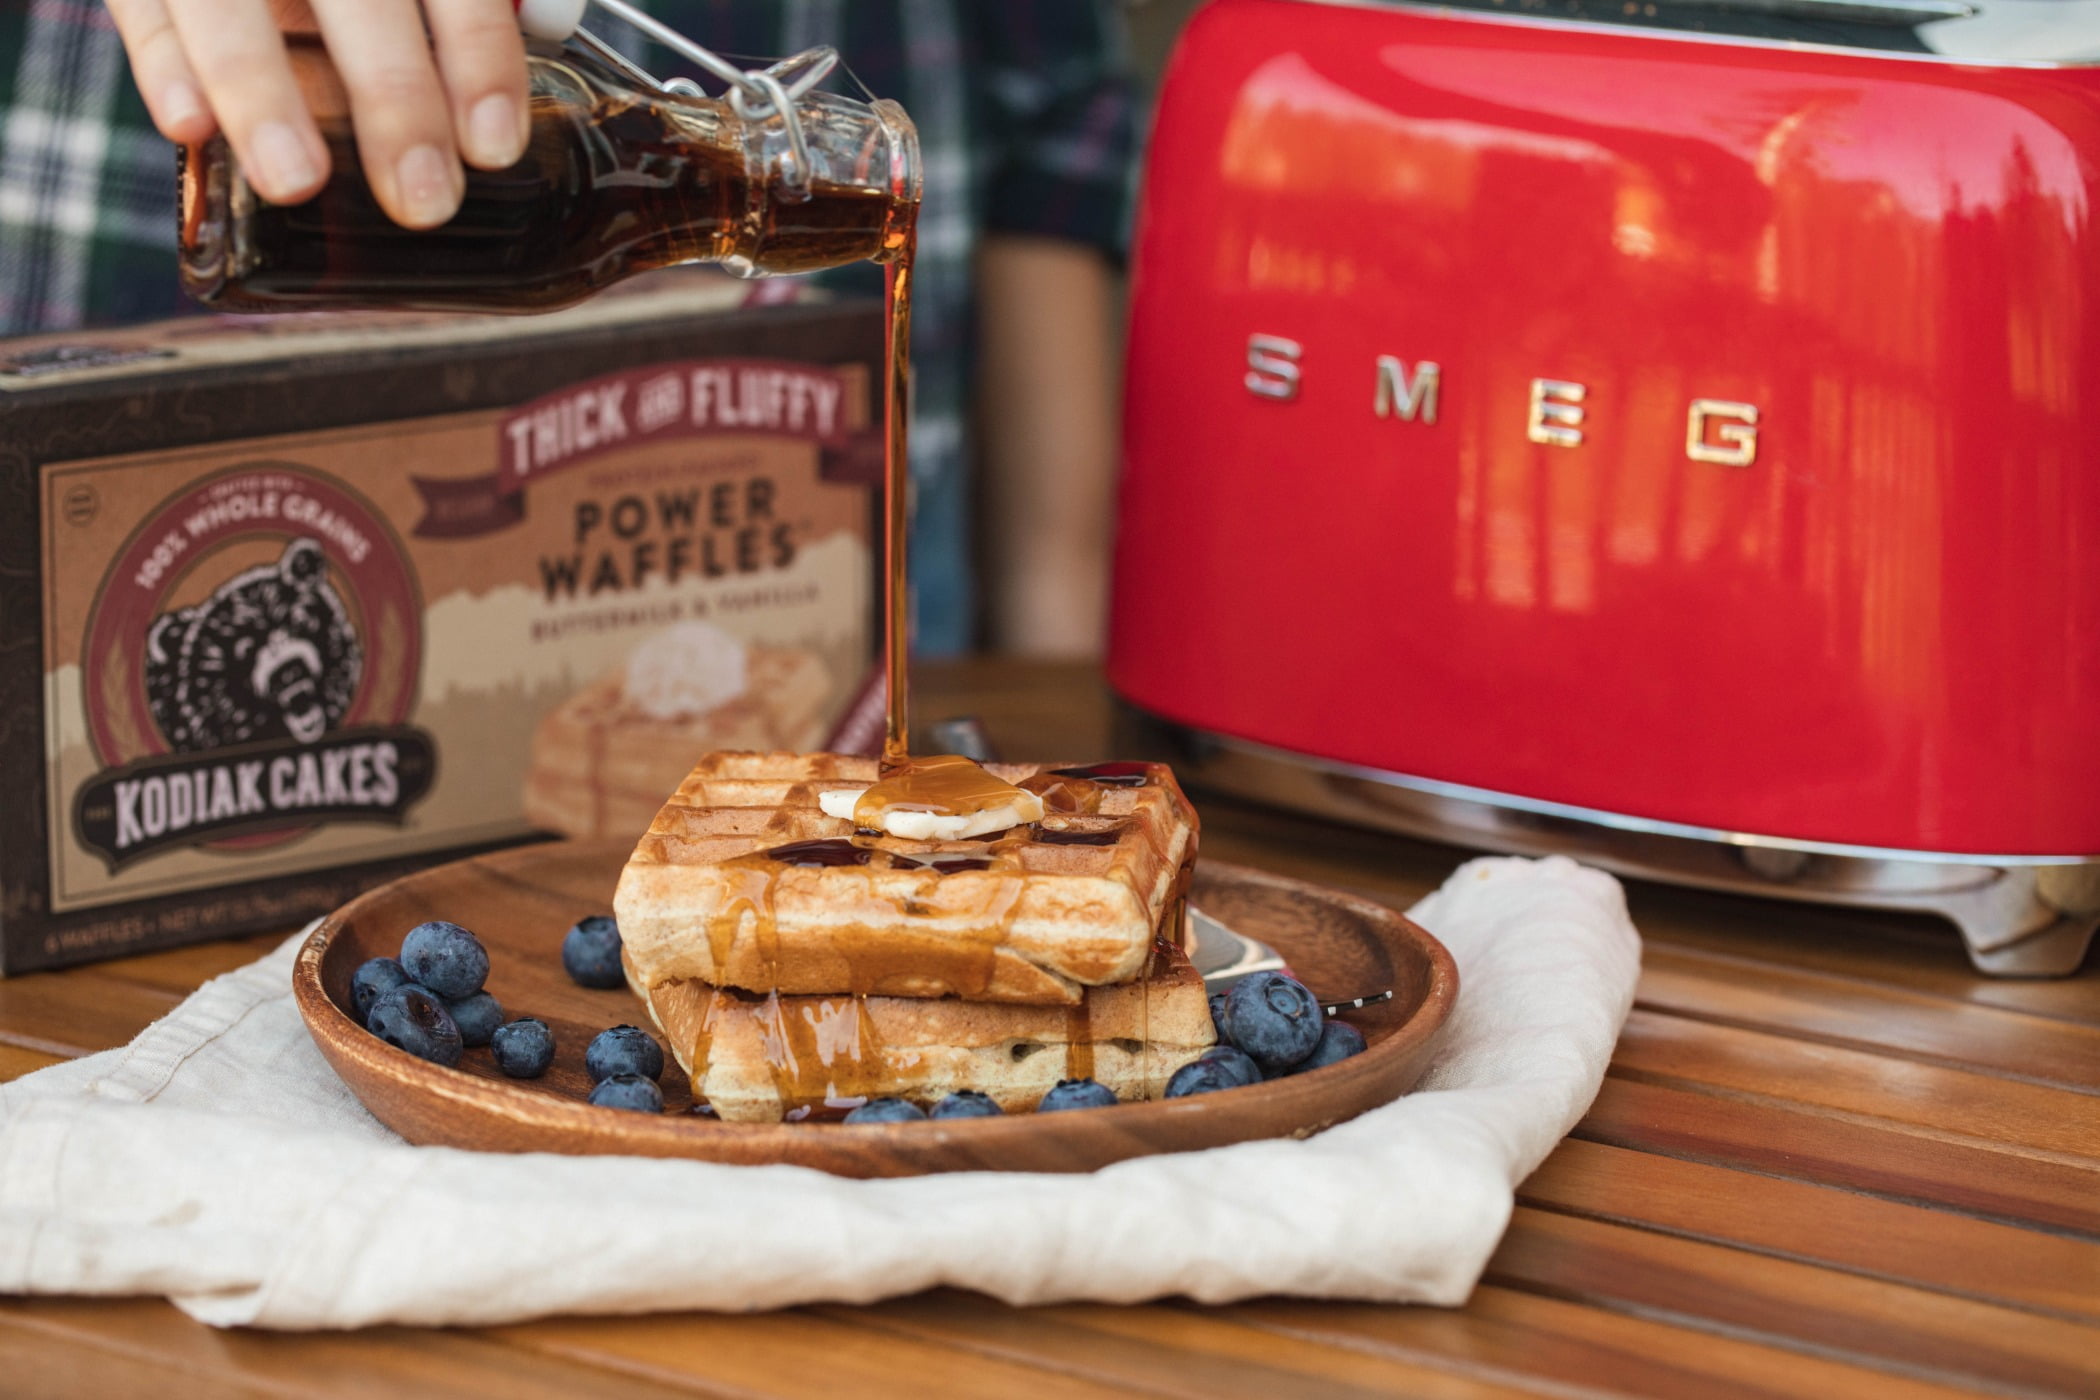 Waffles, Syrup, Blueberries, Box, Packaging, Toaster, Plate, Table, Hand